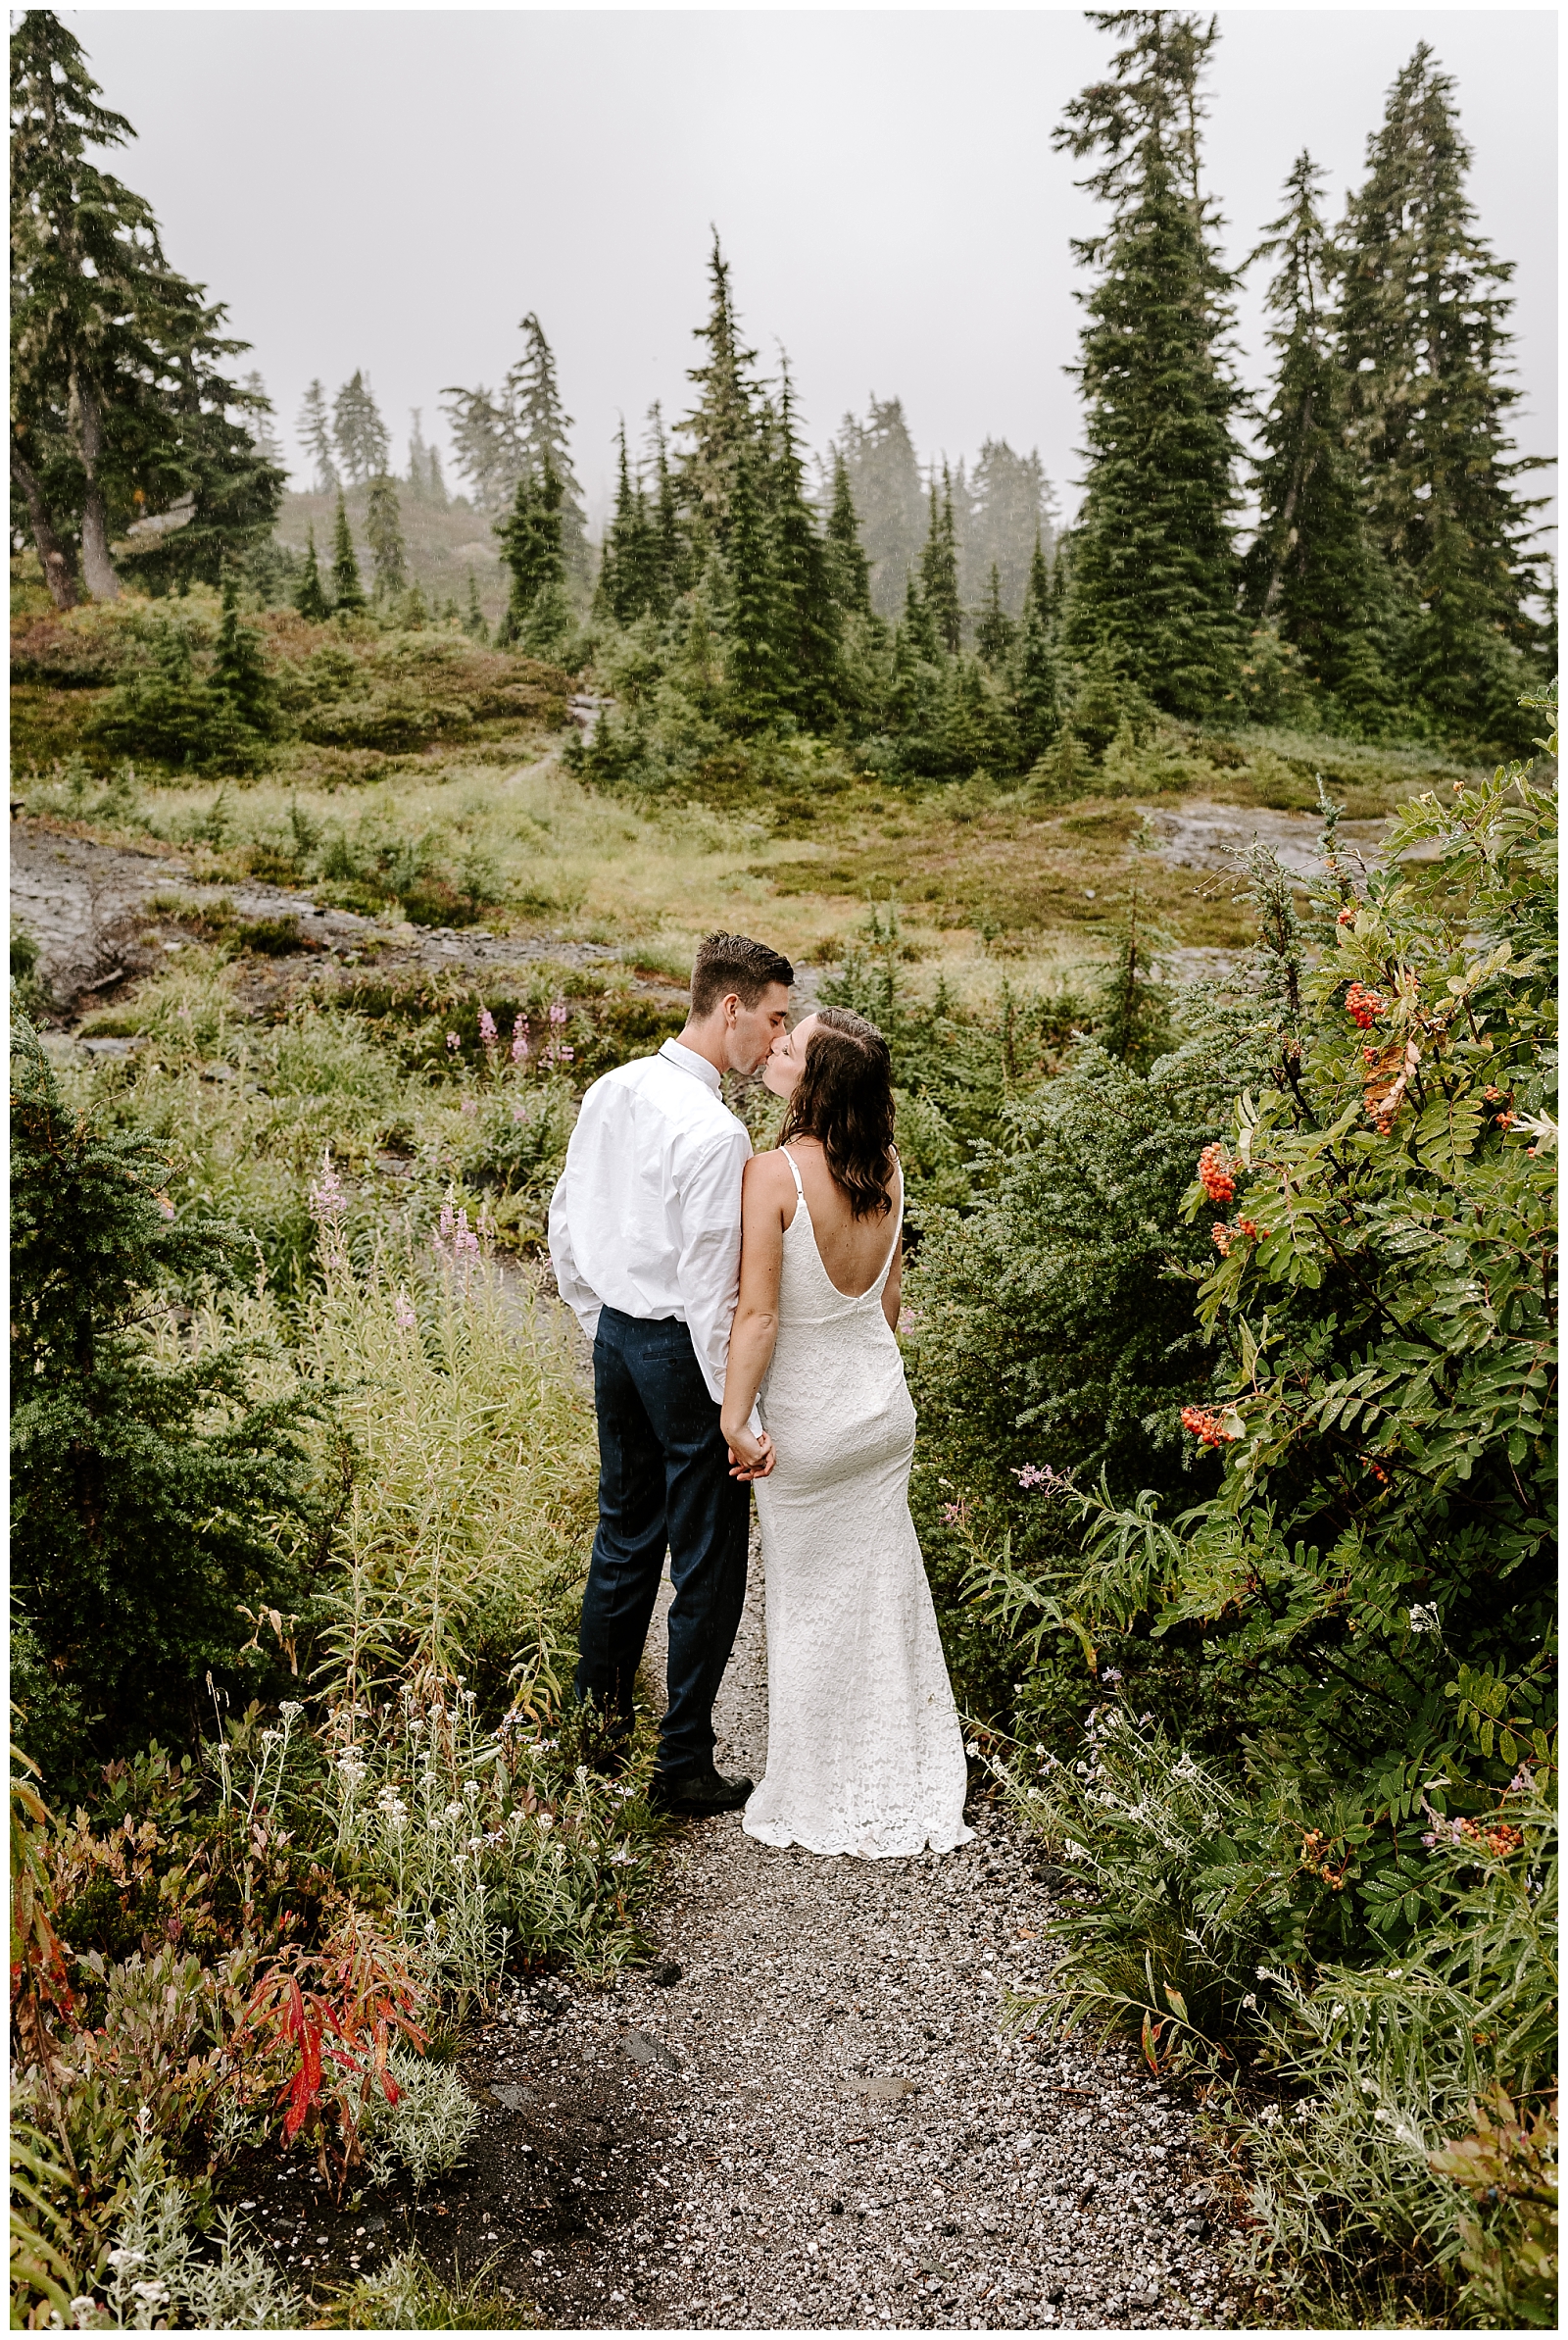 Beautiful couple eloping in the mountains to make their elopement special.